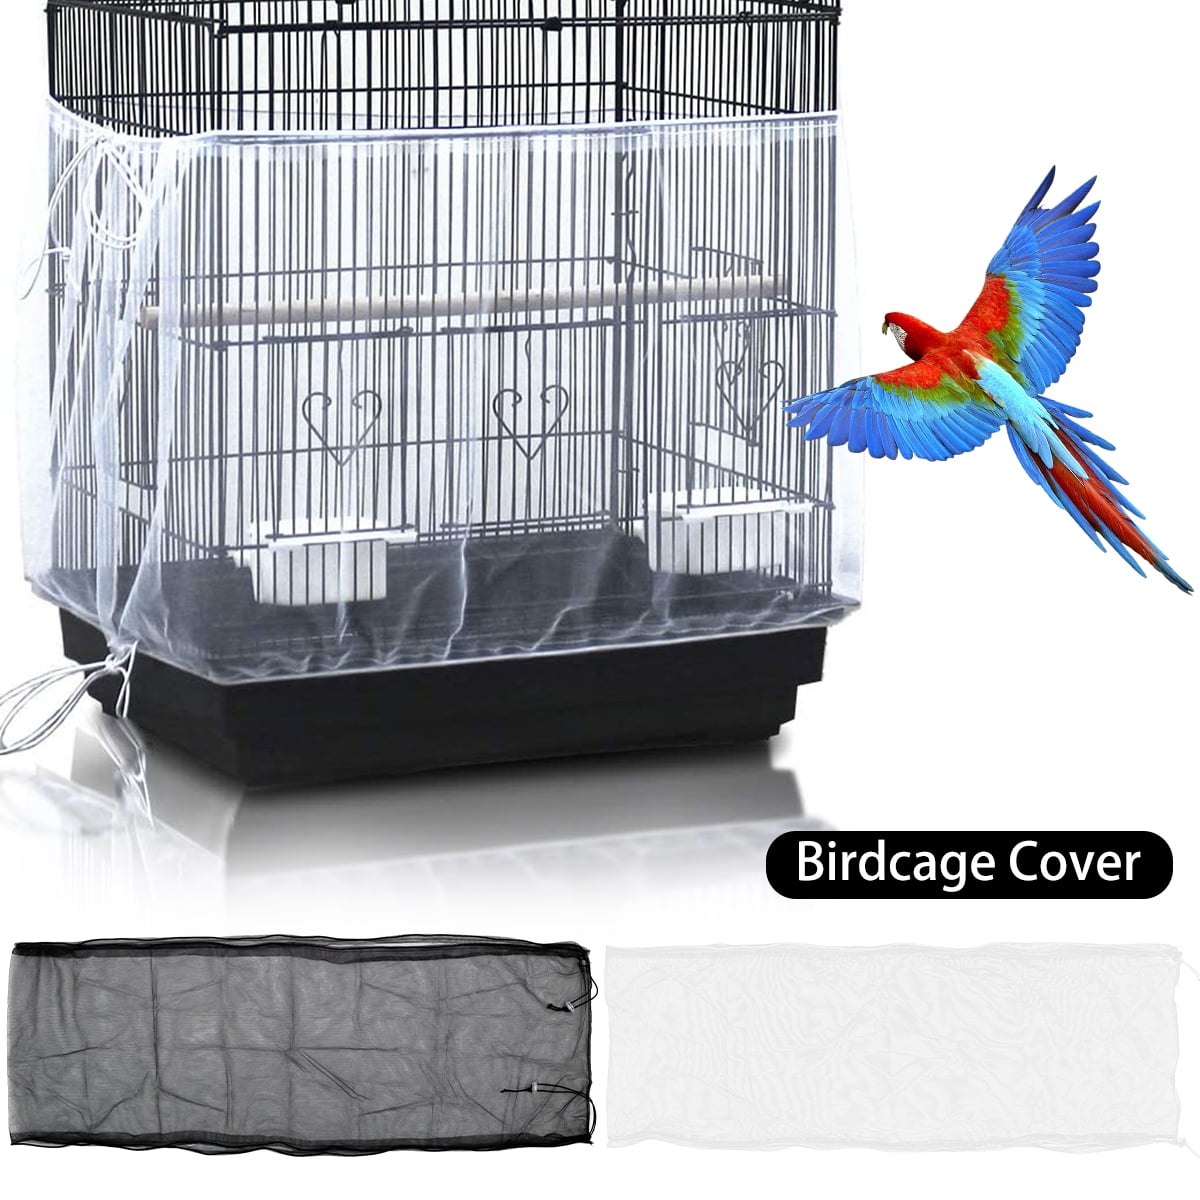 Not Included Birdcage 2 Pieces Bird Cage Cover Black Stars Birdcage Mesh Cover Seed Feather Catcher Soft Birdcage Skirt Guard Birdcage Nylon Mesh Netting for Parrot Parakeet Macaw Round Square Cage 